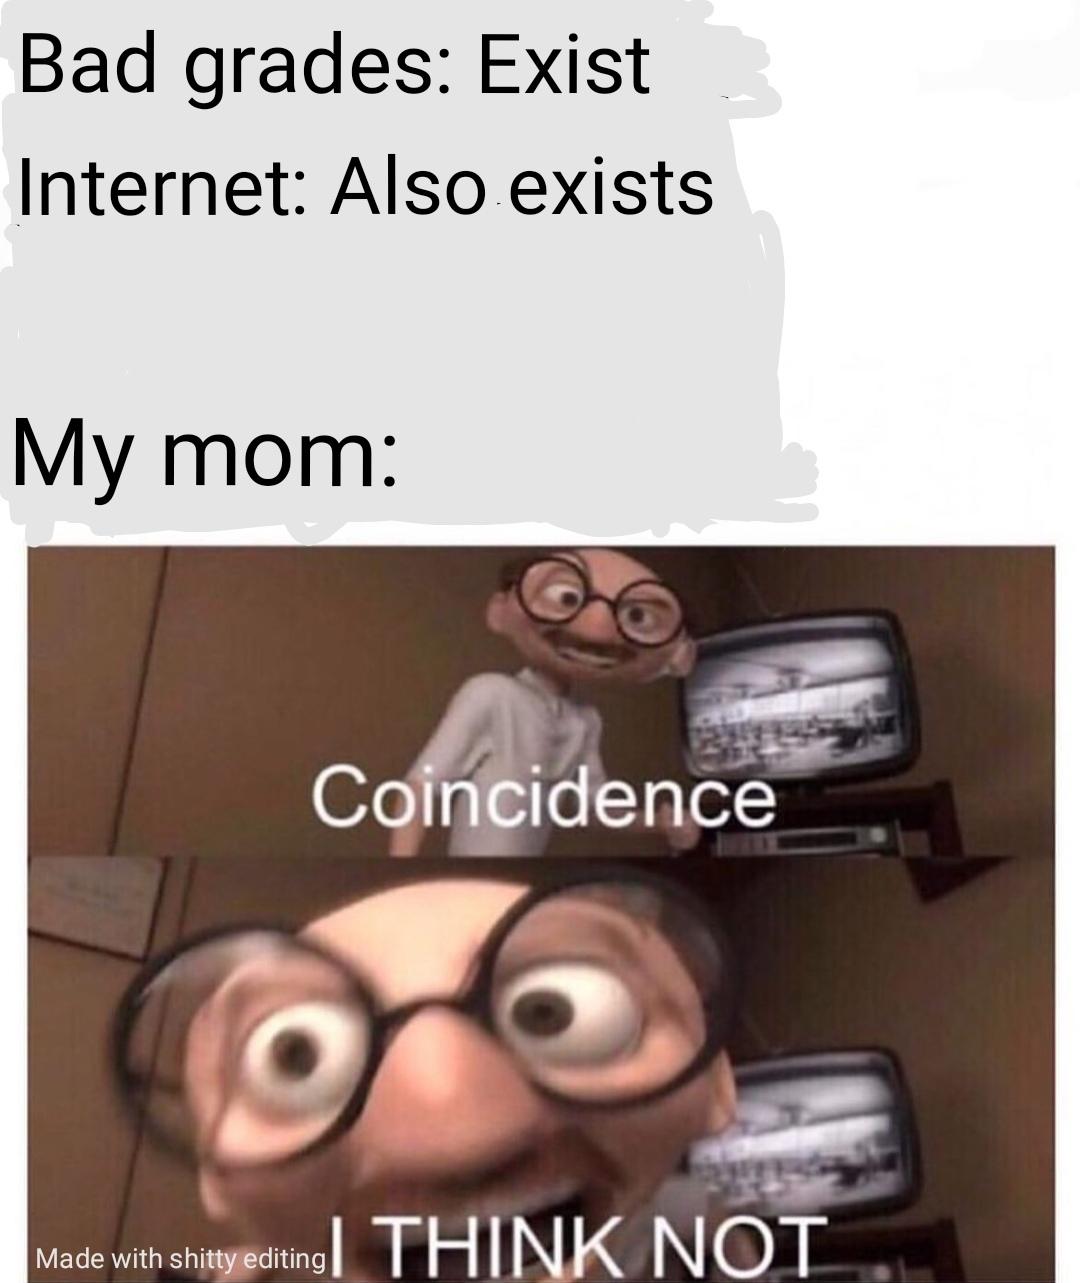 Funny relatable memes - coincidence i think not - Bad grades Exist Internet Also exists My mom Coincidence Made with shitty editing Made with shitty editing| Think Not